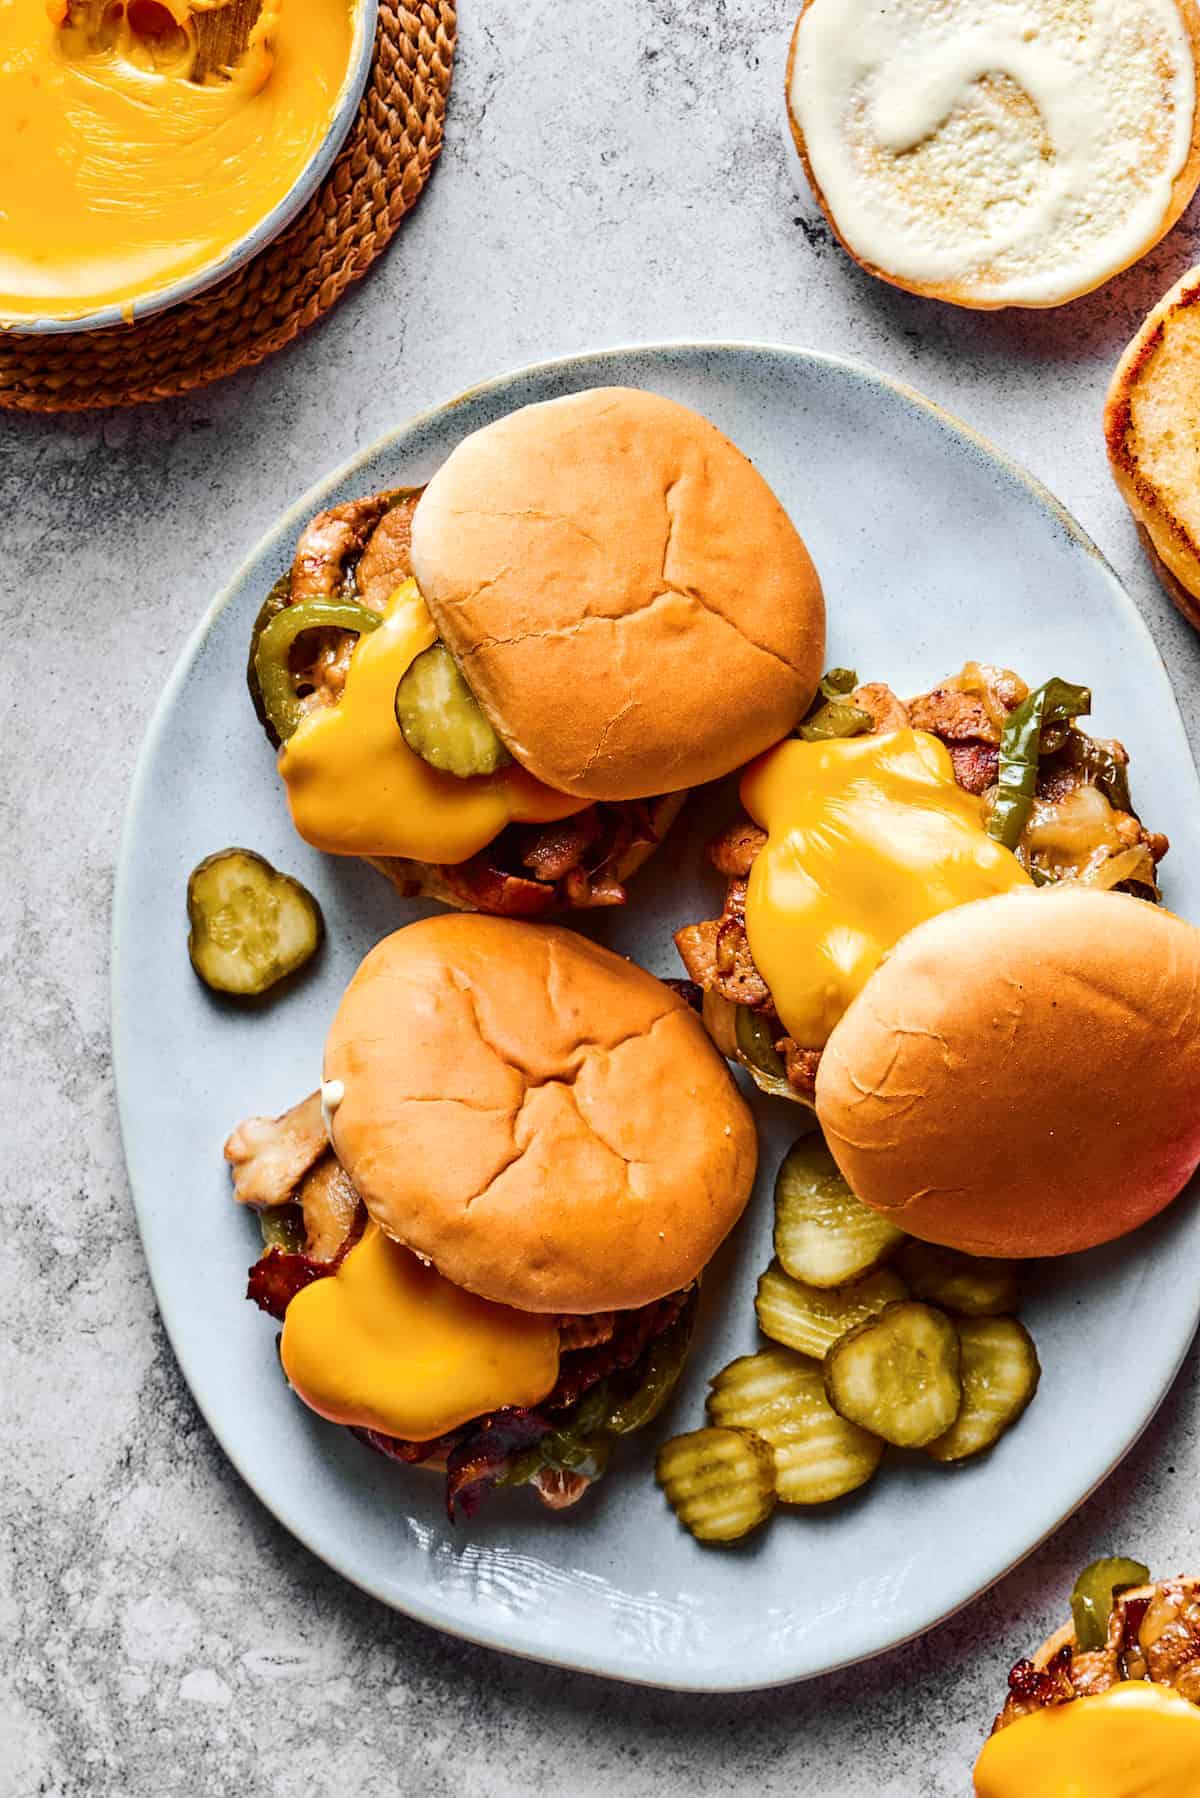 Philly Cheesesteak Burgers arranged on a plate.